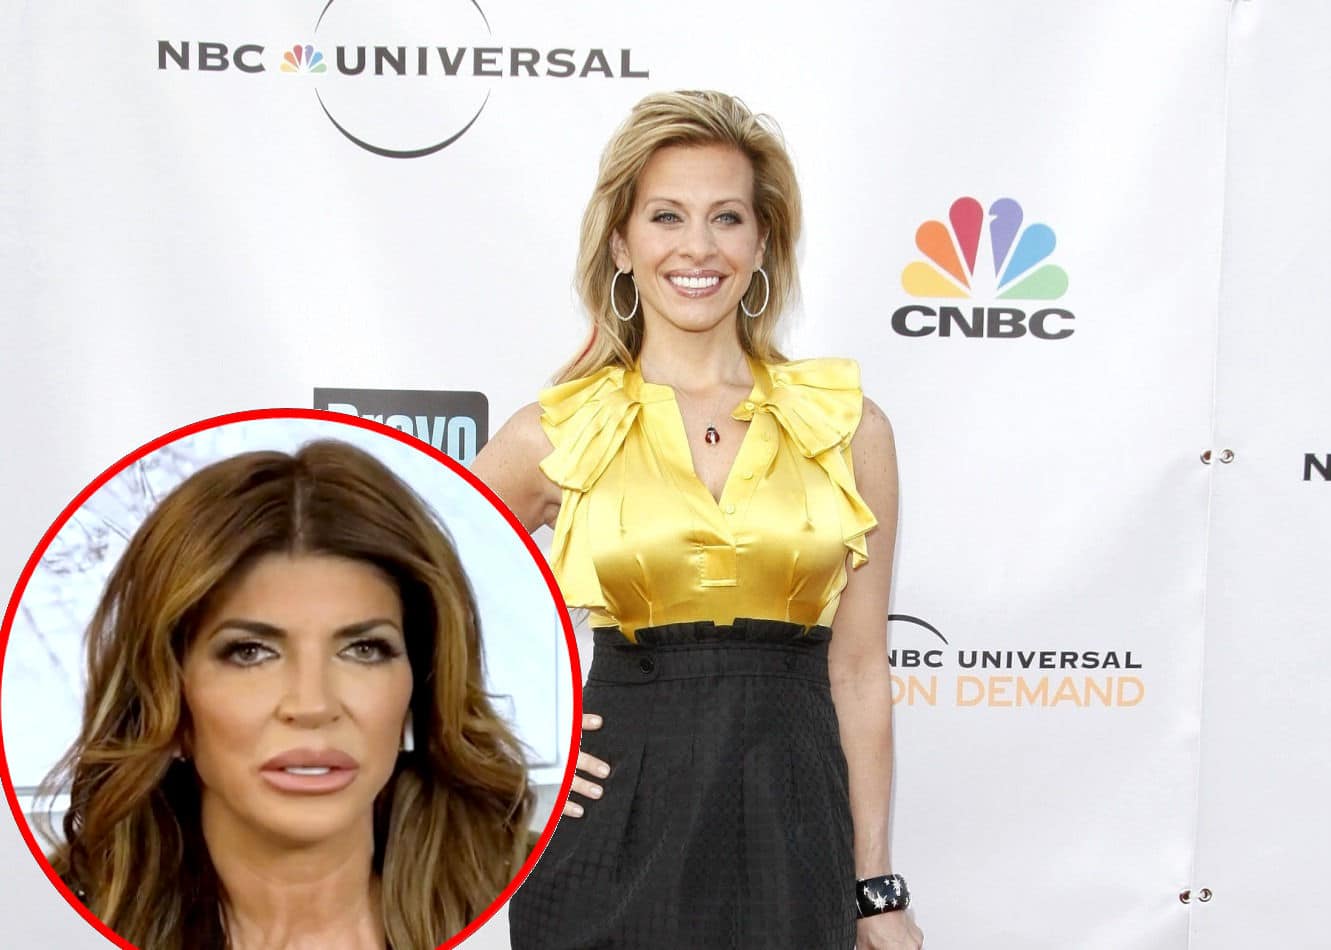 RHONJ's Dina Manzo Reacts to Claims of a Falling Out With Teresa Giudice After Critic Calls Her Out Over Cryptic Messages